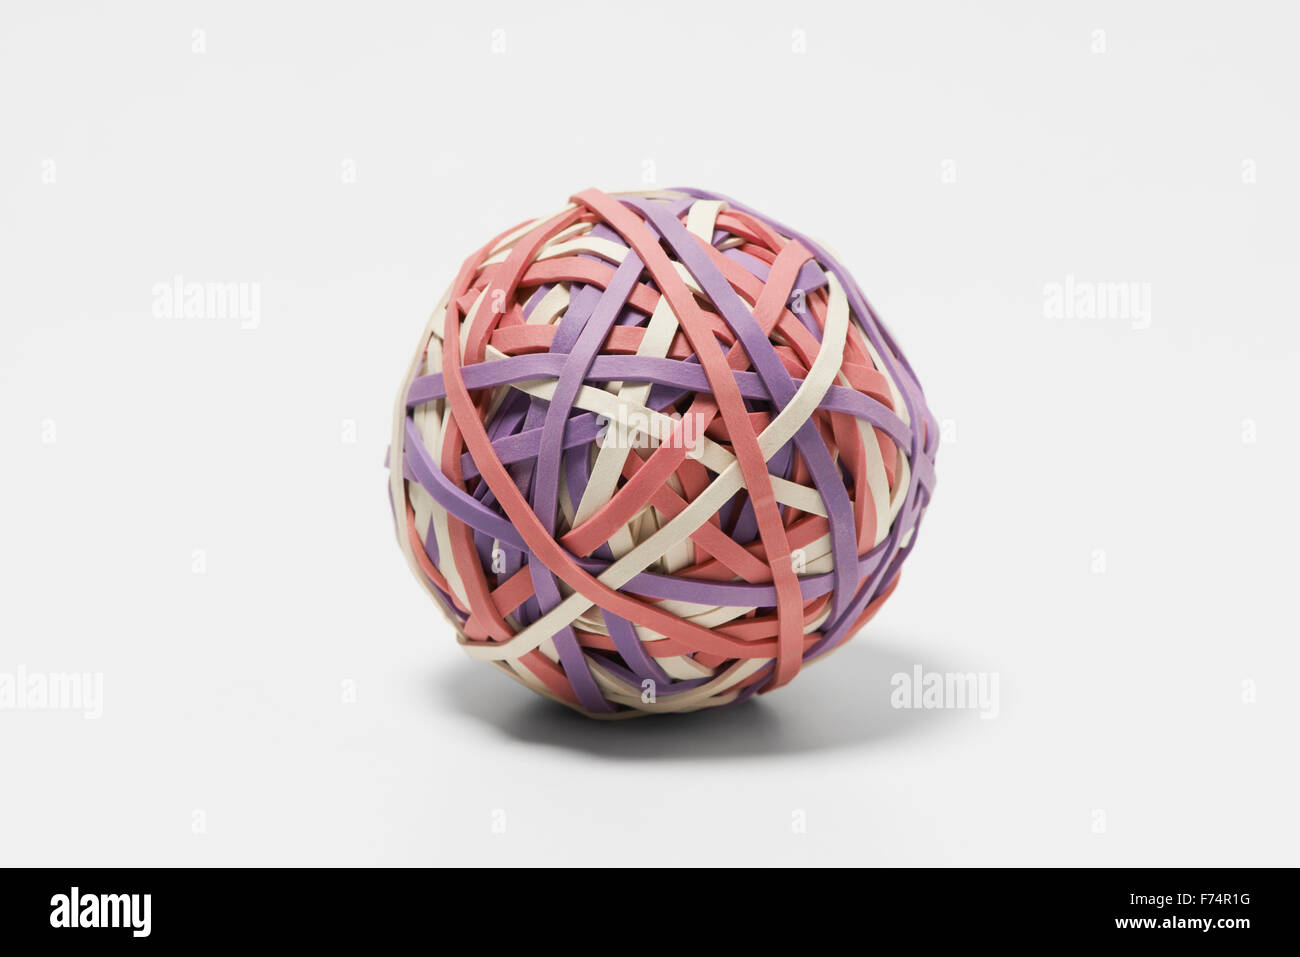 Ball of Elastic Bands Stock Photo